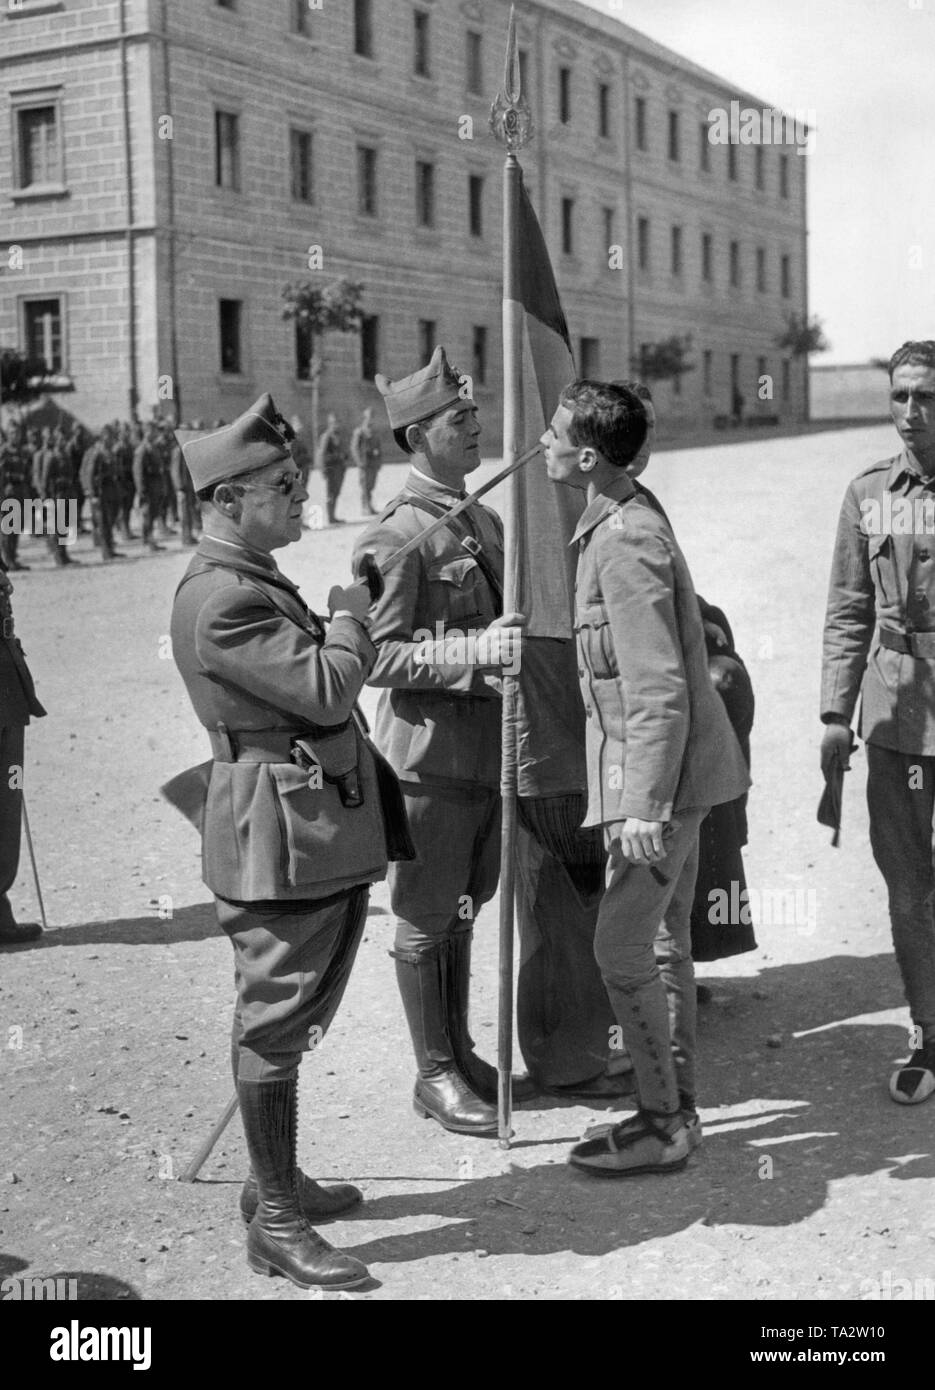 Undated photo of a swearing-in of Spanish national recruits in Salamanca  after the outbreak of the Spanish Civil War in 1936. The picture shows a  Teniente (lieutenant), on the left with sunglasses